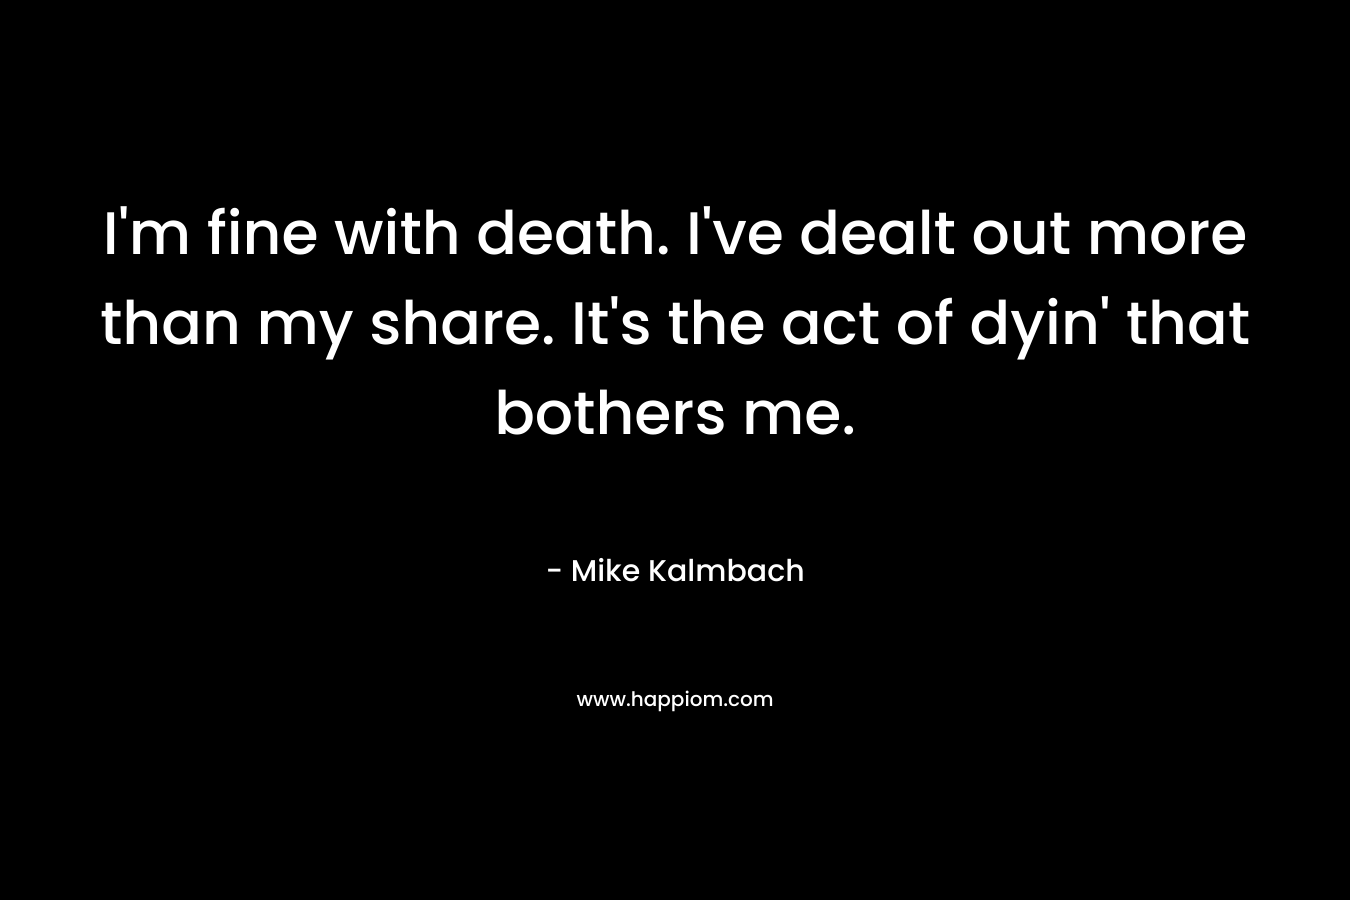 I’m fine with death. I’ve dealt out more than my share. It’s the act of dyin’ that bothers me. – Mike Kalmbach